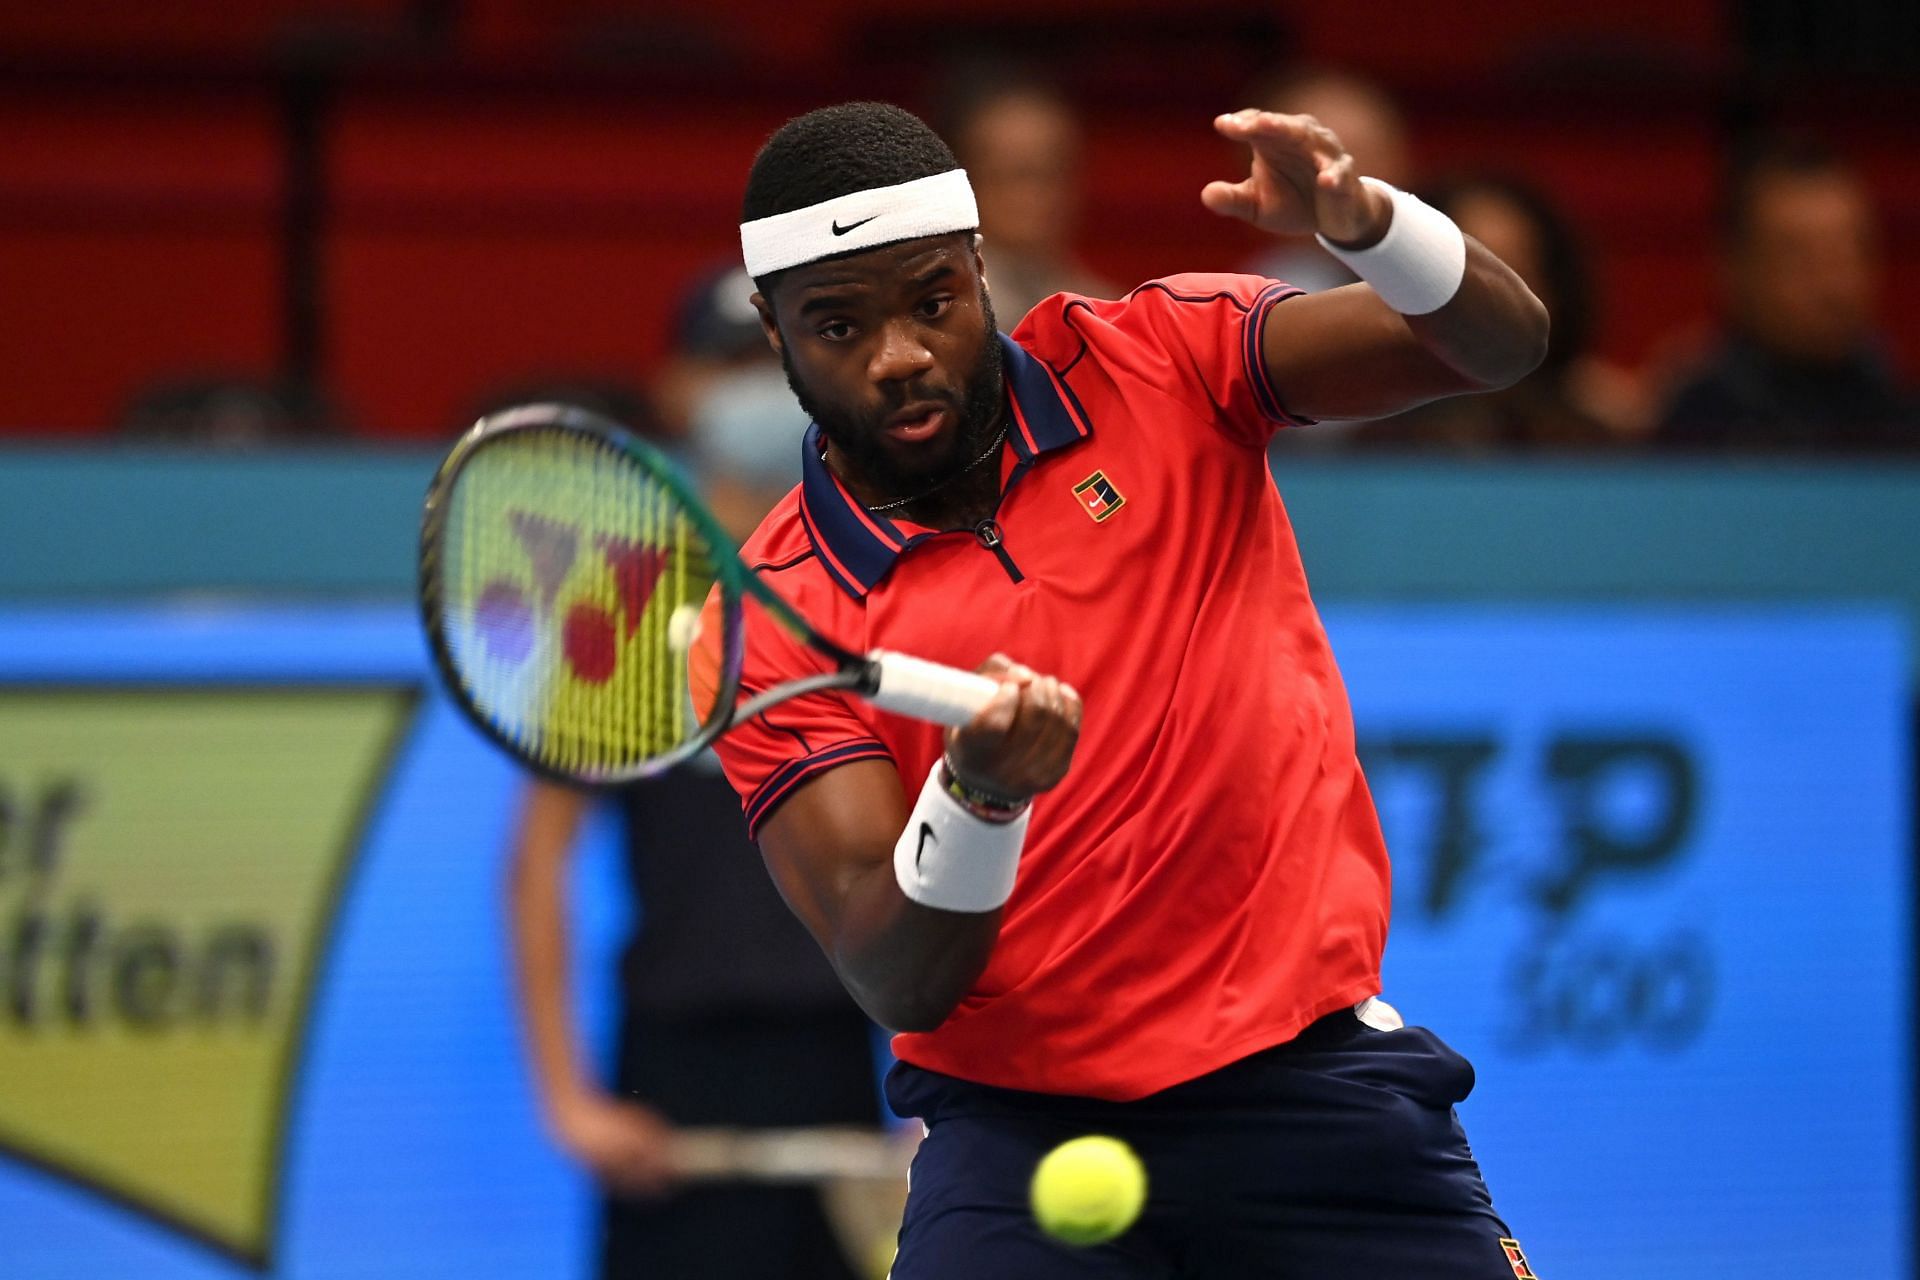 Frances Tiafoe at the 2021 Erste Bank Open - Day 6